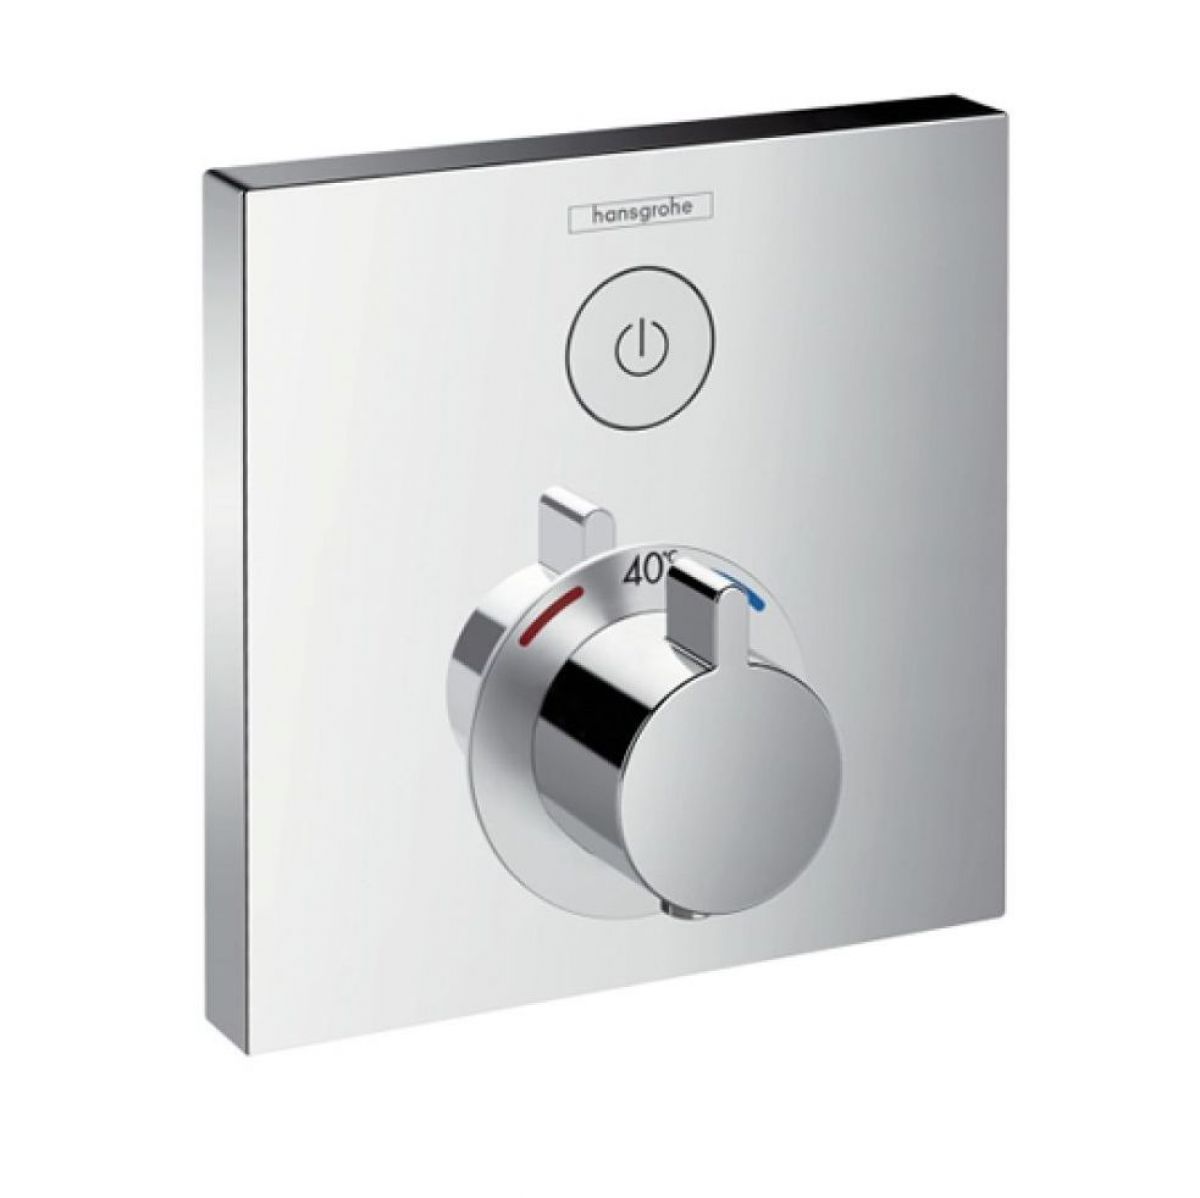 Hansgrohe ShowerSelect Thermostatic Mixer 1 Outlet (Square)